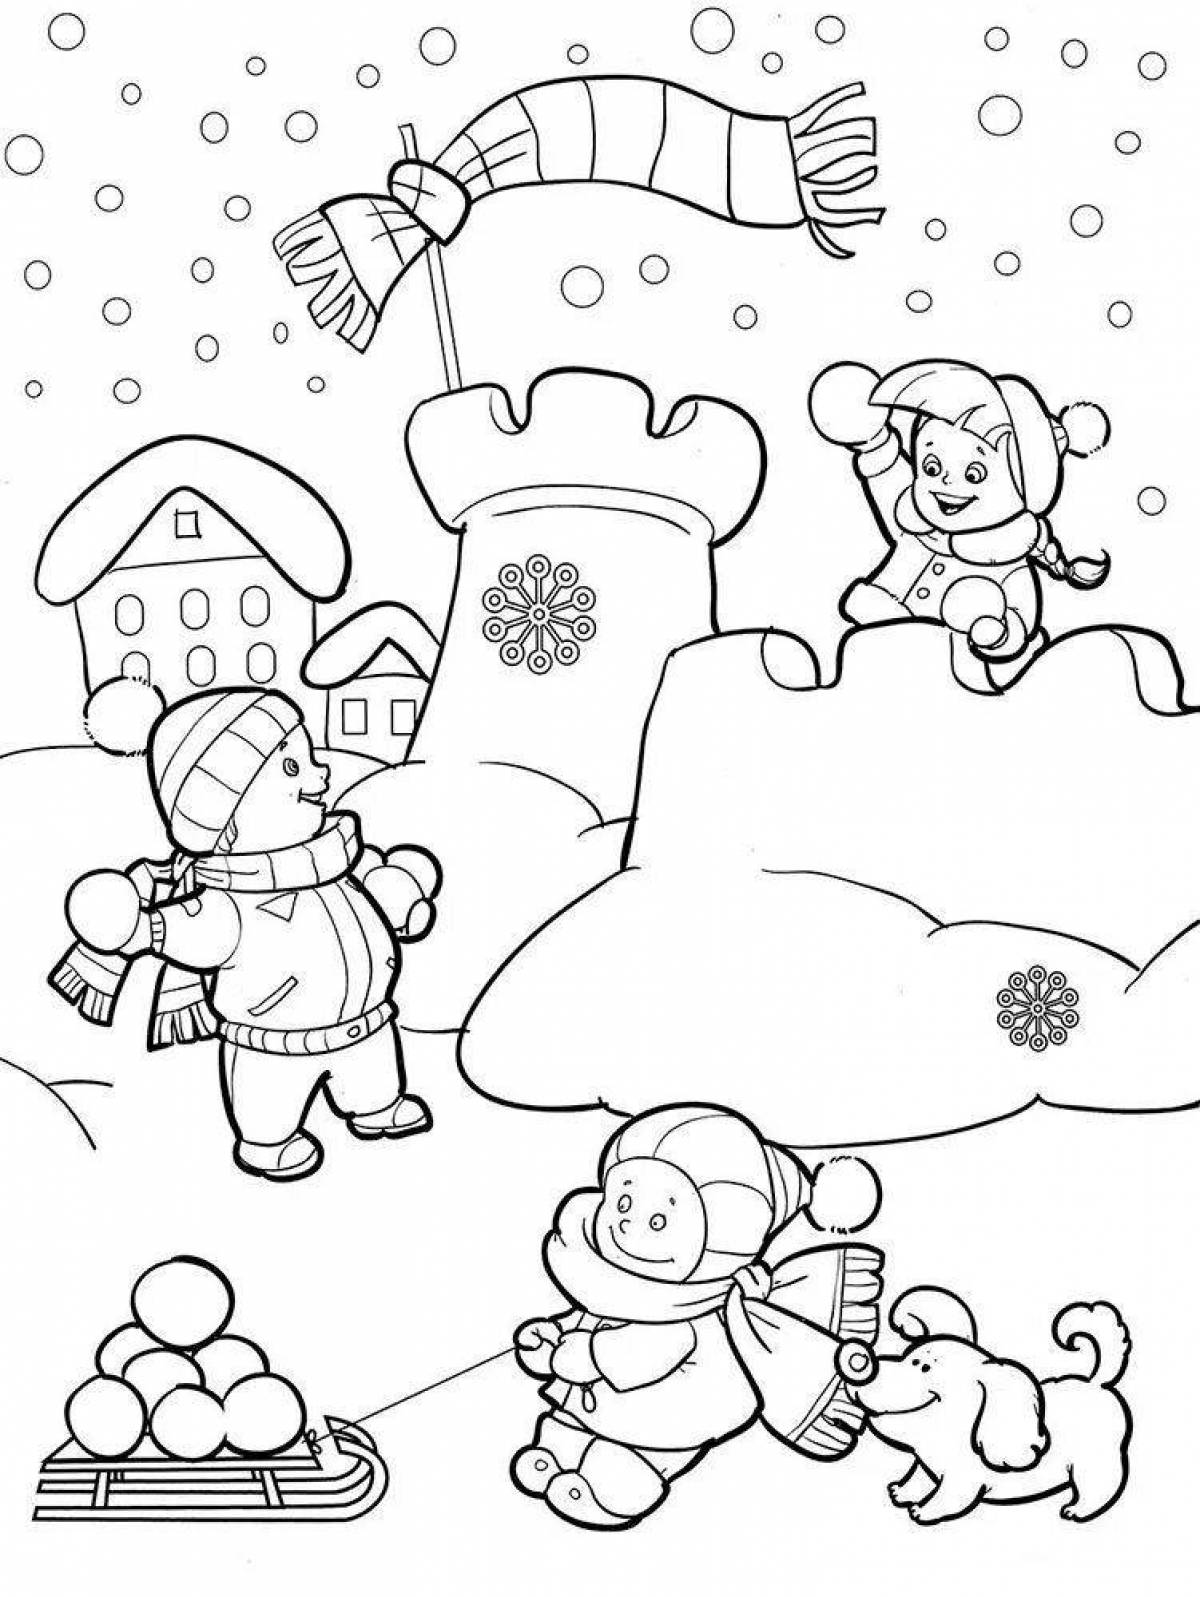 Gorgeous Christmas games coloring book